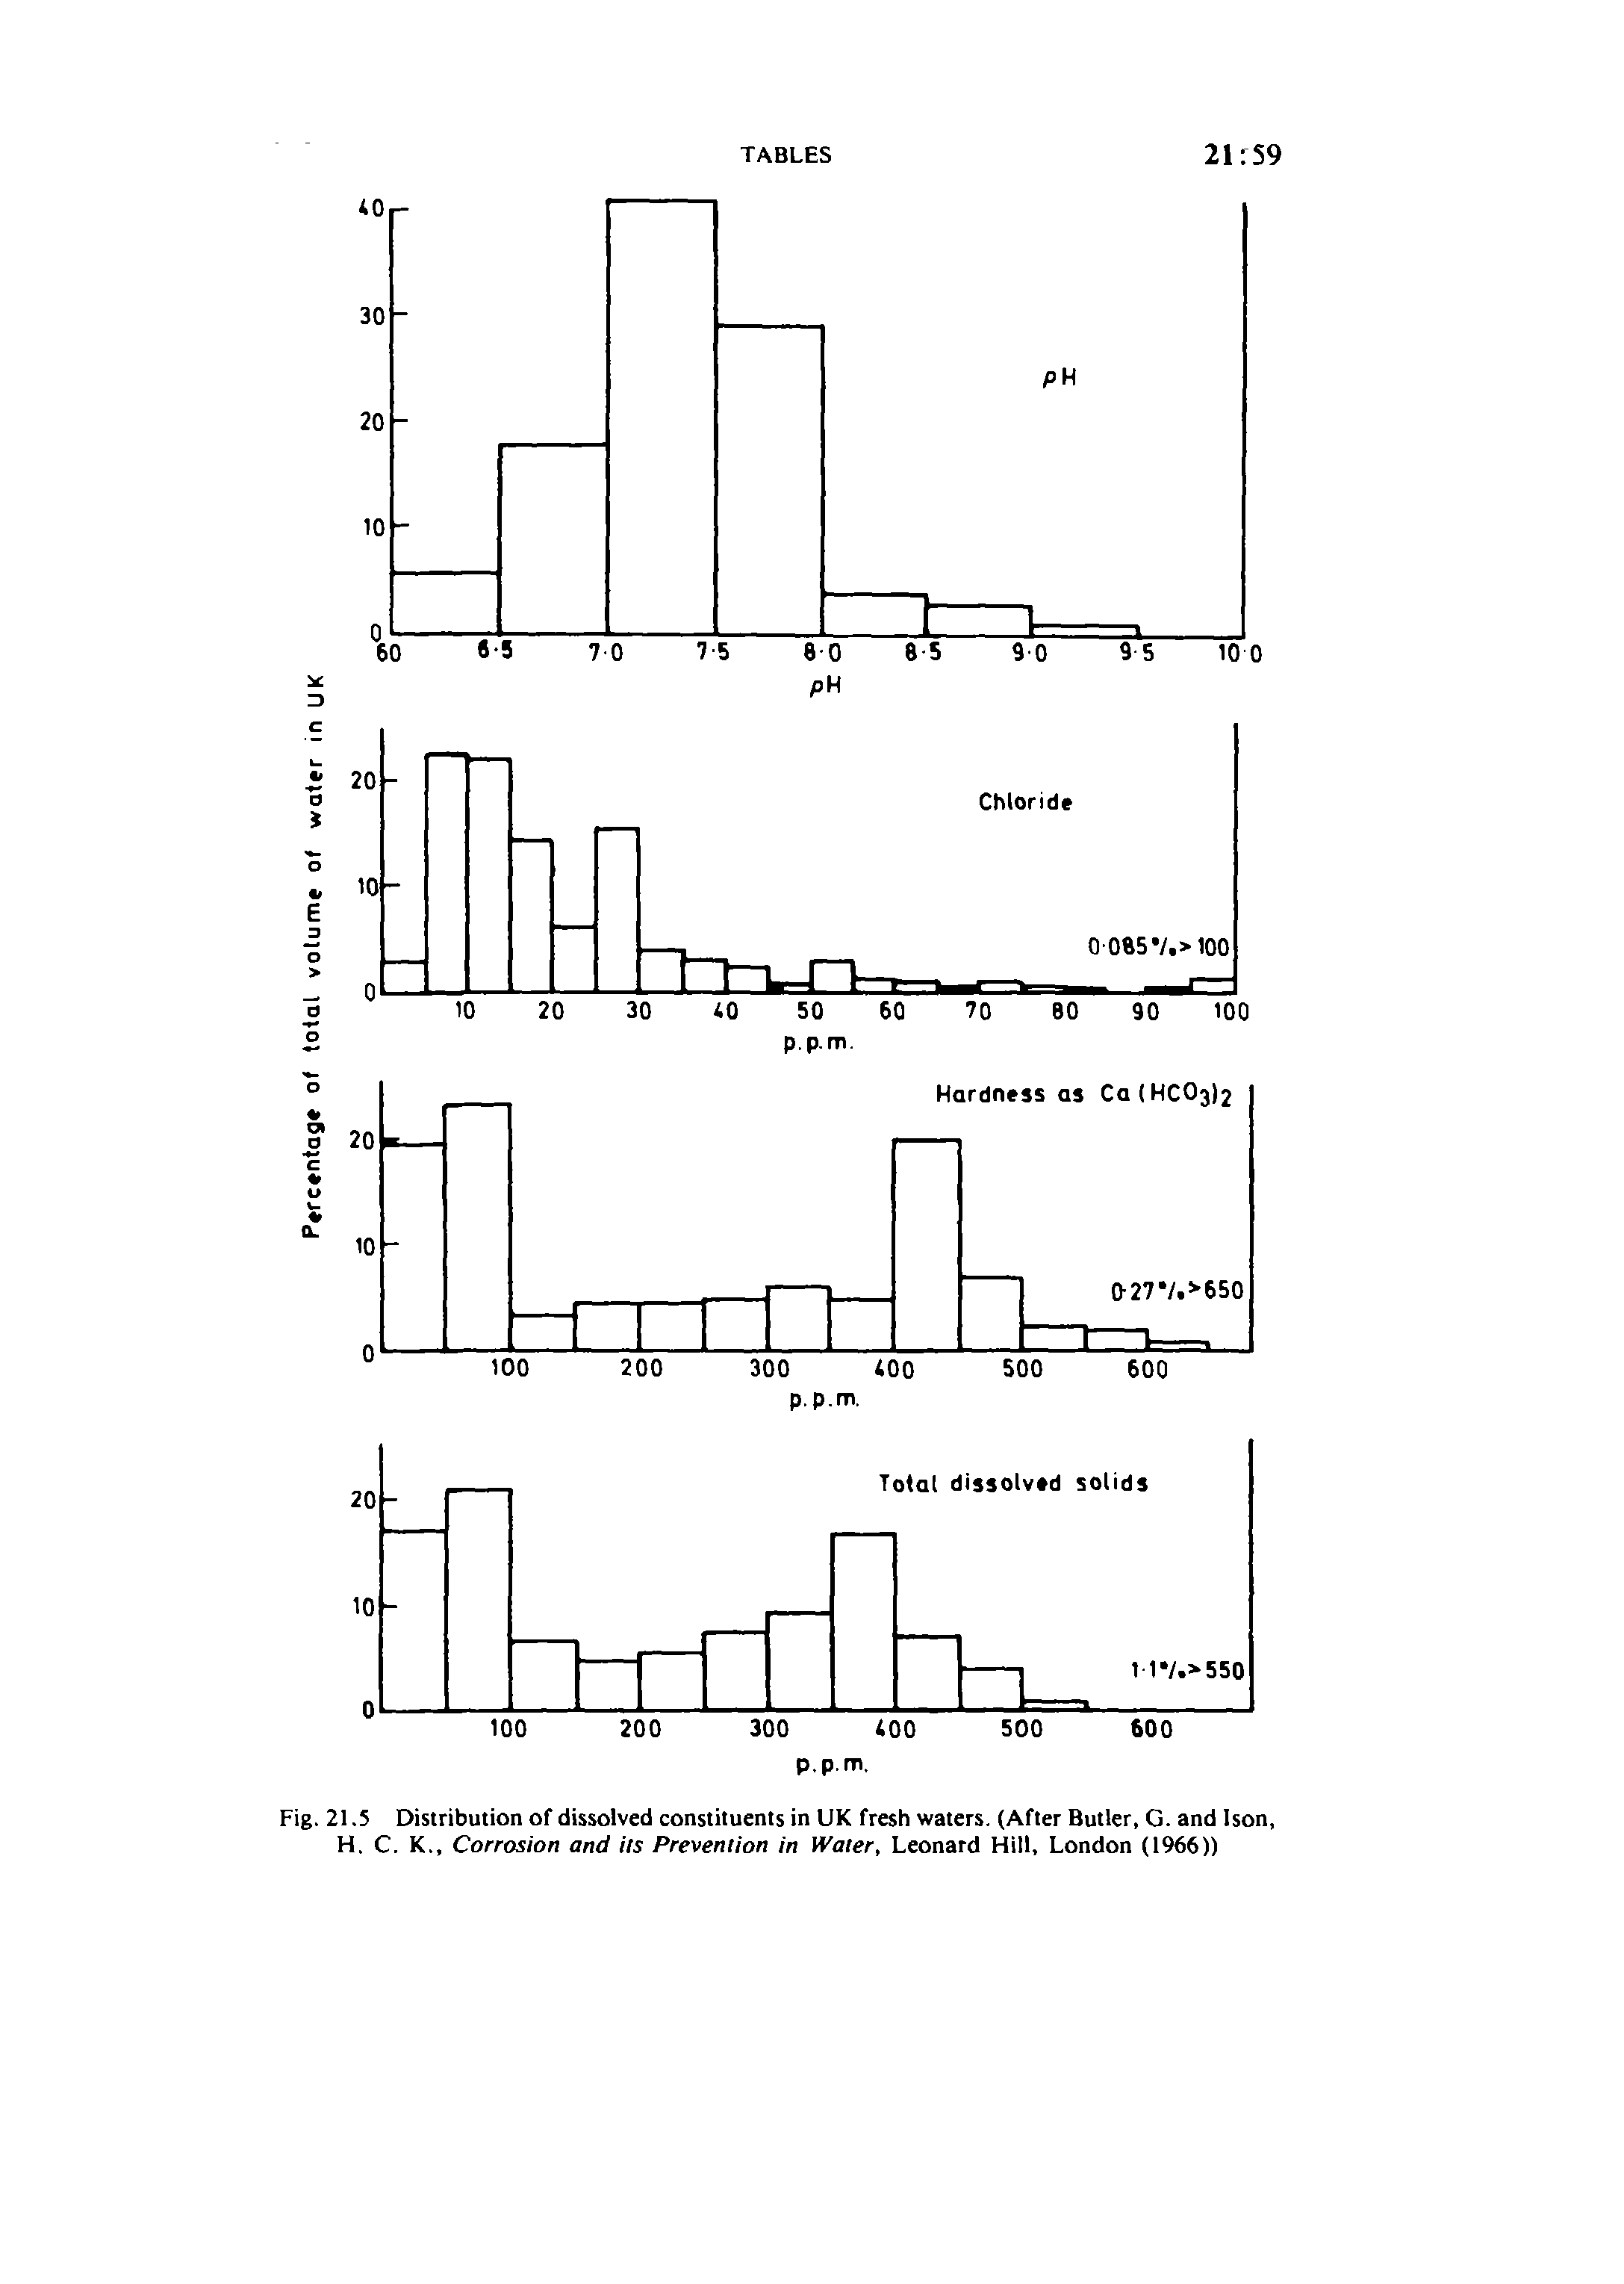 Fig. 21.5 Distribution of dissolved constituents in UK fresh waters. (After Butler, G. and Ison, H. C. K., Corrosion and its Prevention in Water, Leonard Hill, London (1966))...